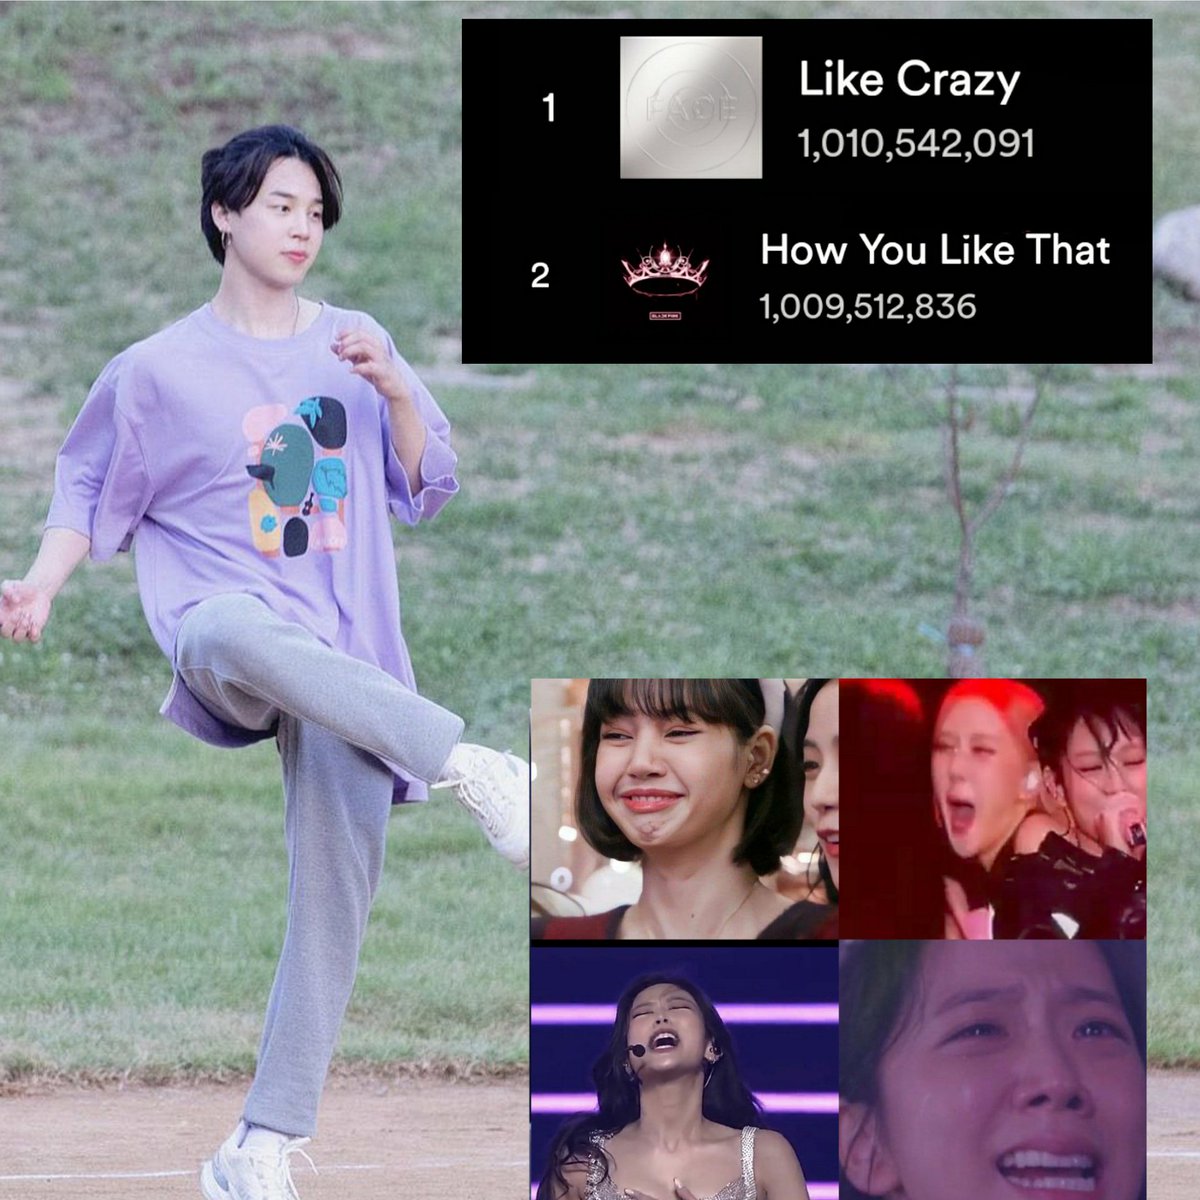 #JIMIN's 'Like Crazy' in just one year, surpassed FlopPink's most streamed/looped song till date 'How You Iike That'! We know why bl0nks are mad and can't stop mentioning Jimin.